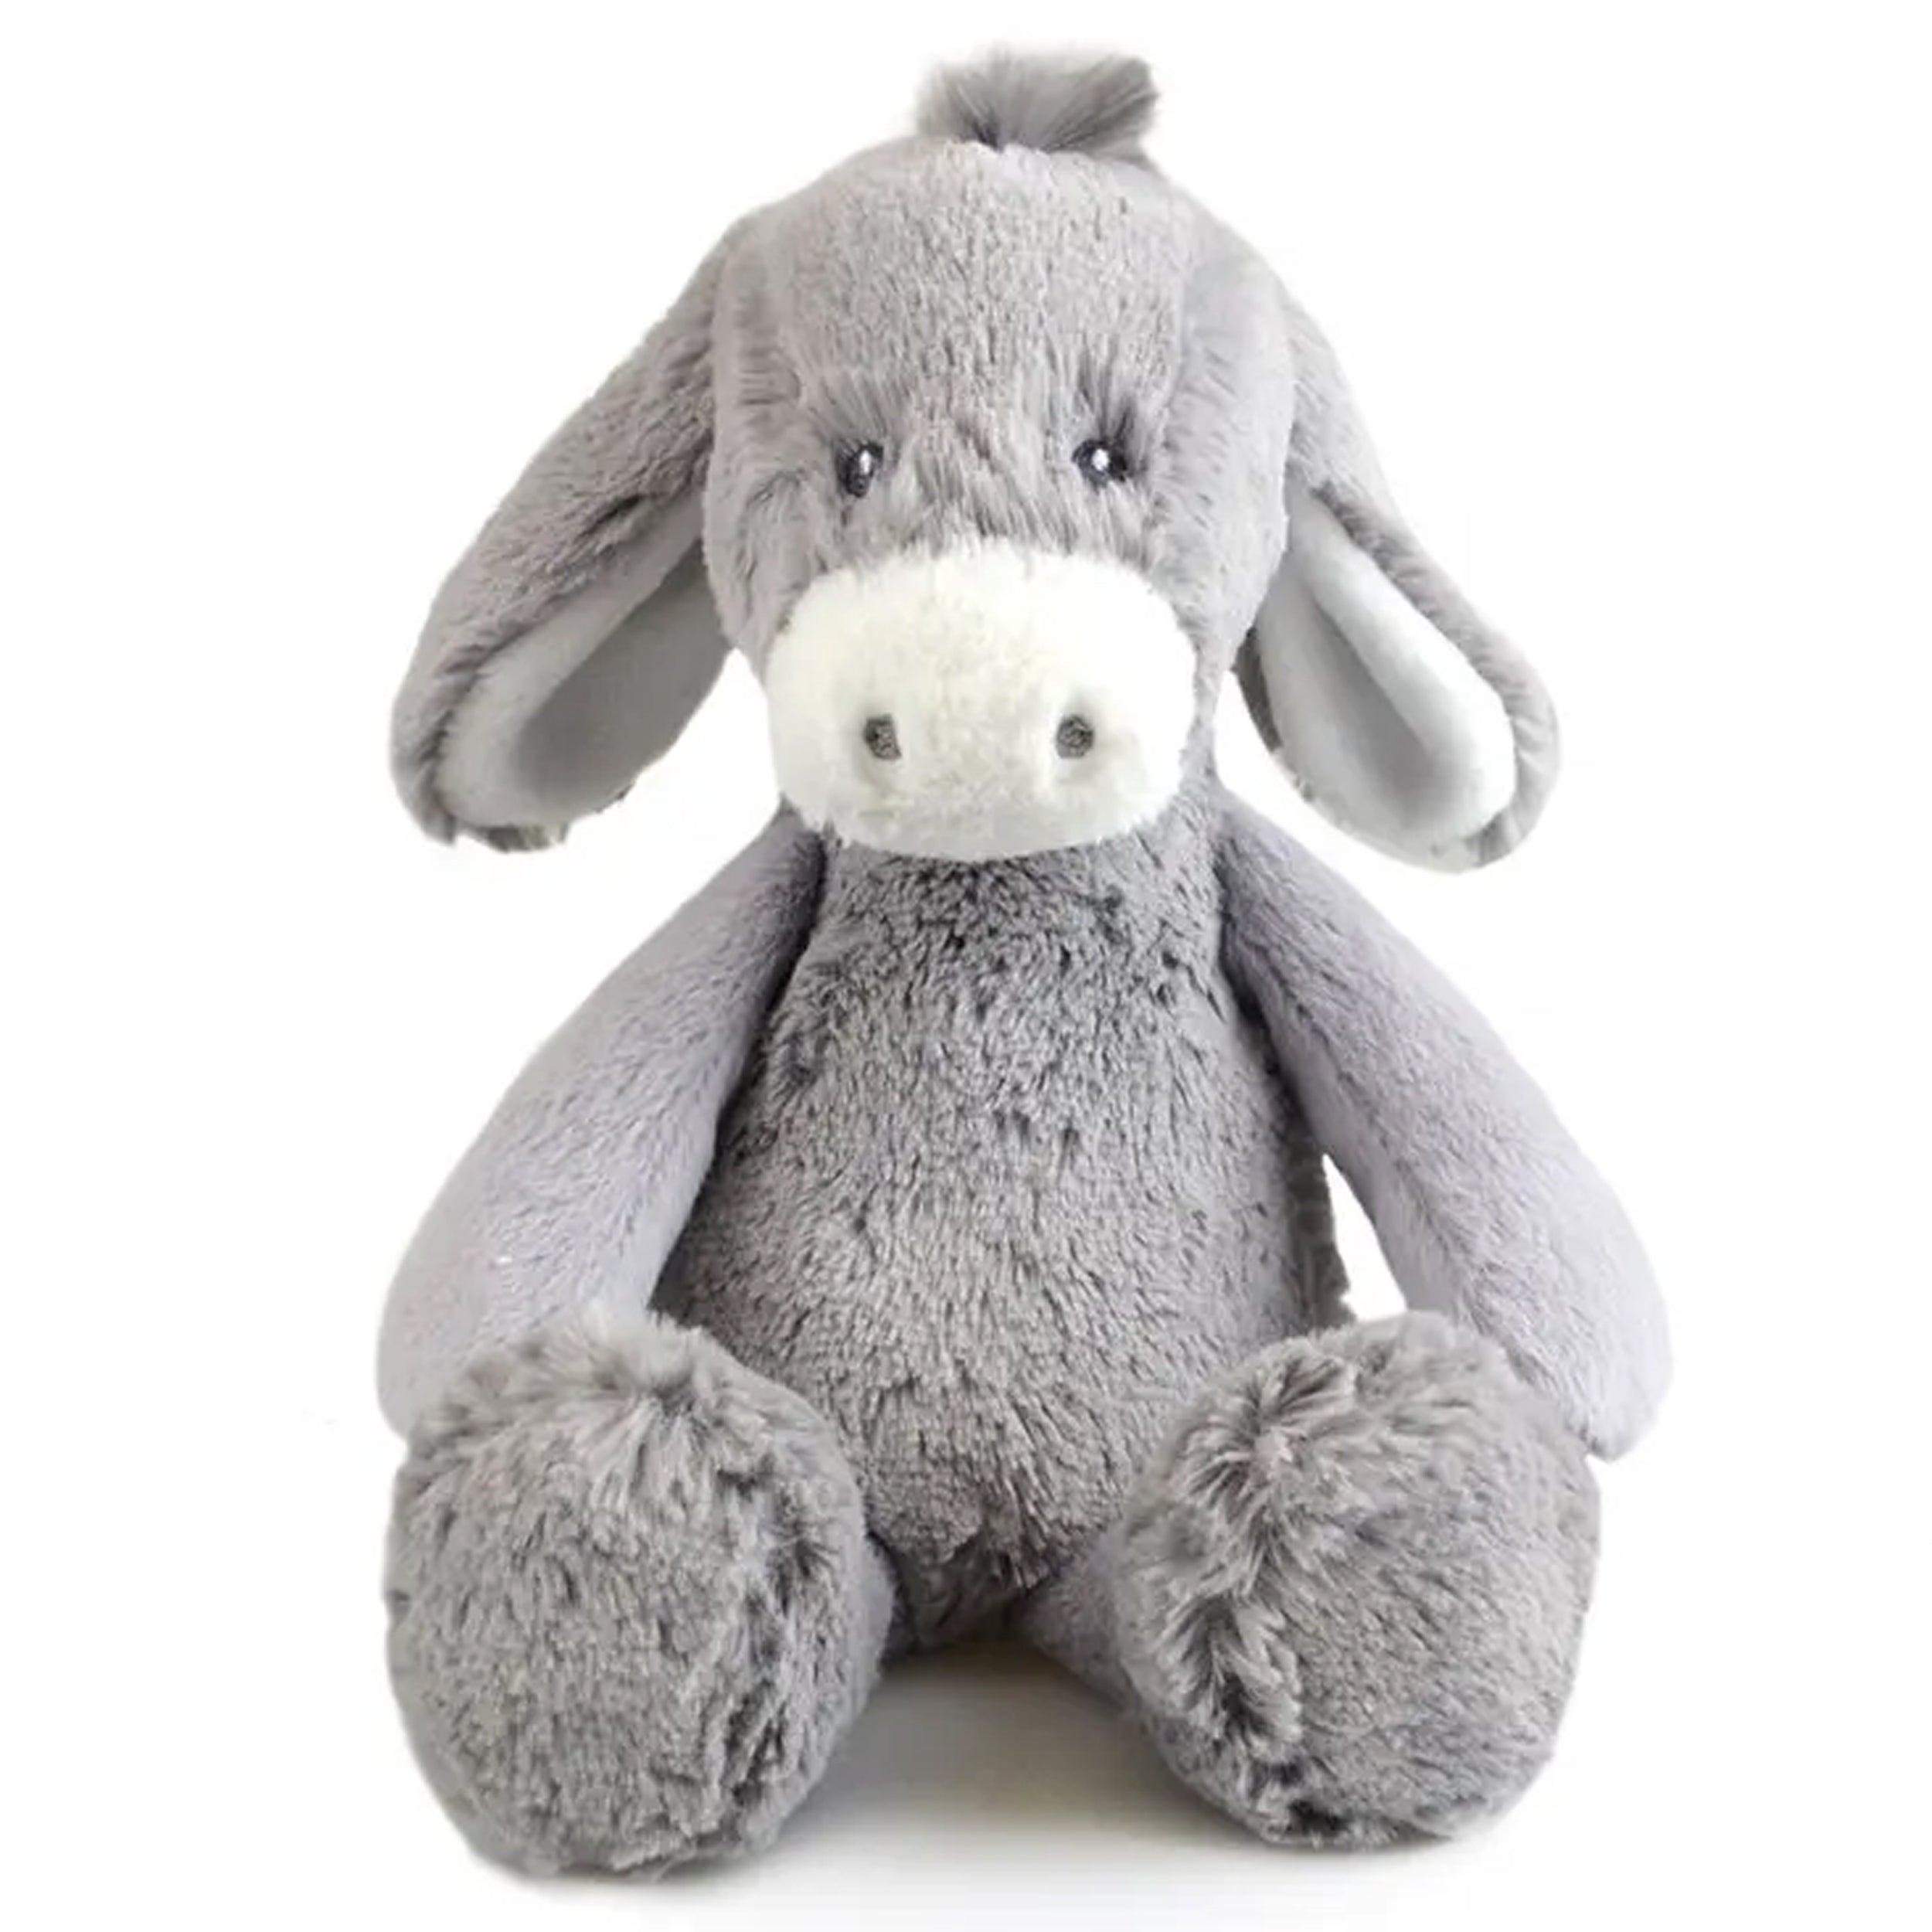 Bring Home Your Child's Favorite Animals with Our Soft Plush Toy Collection